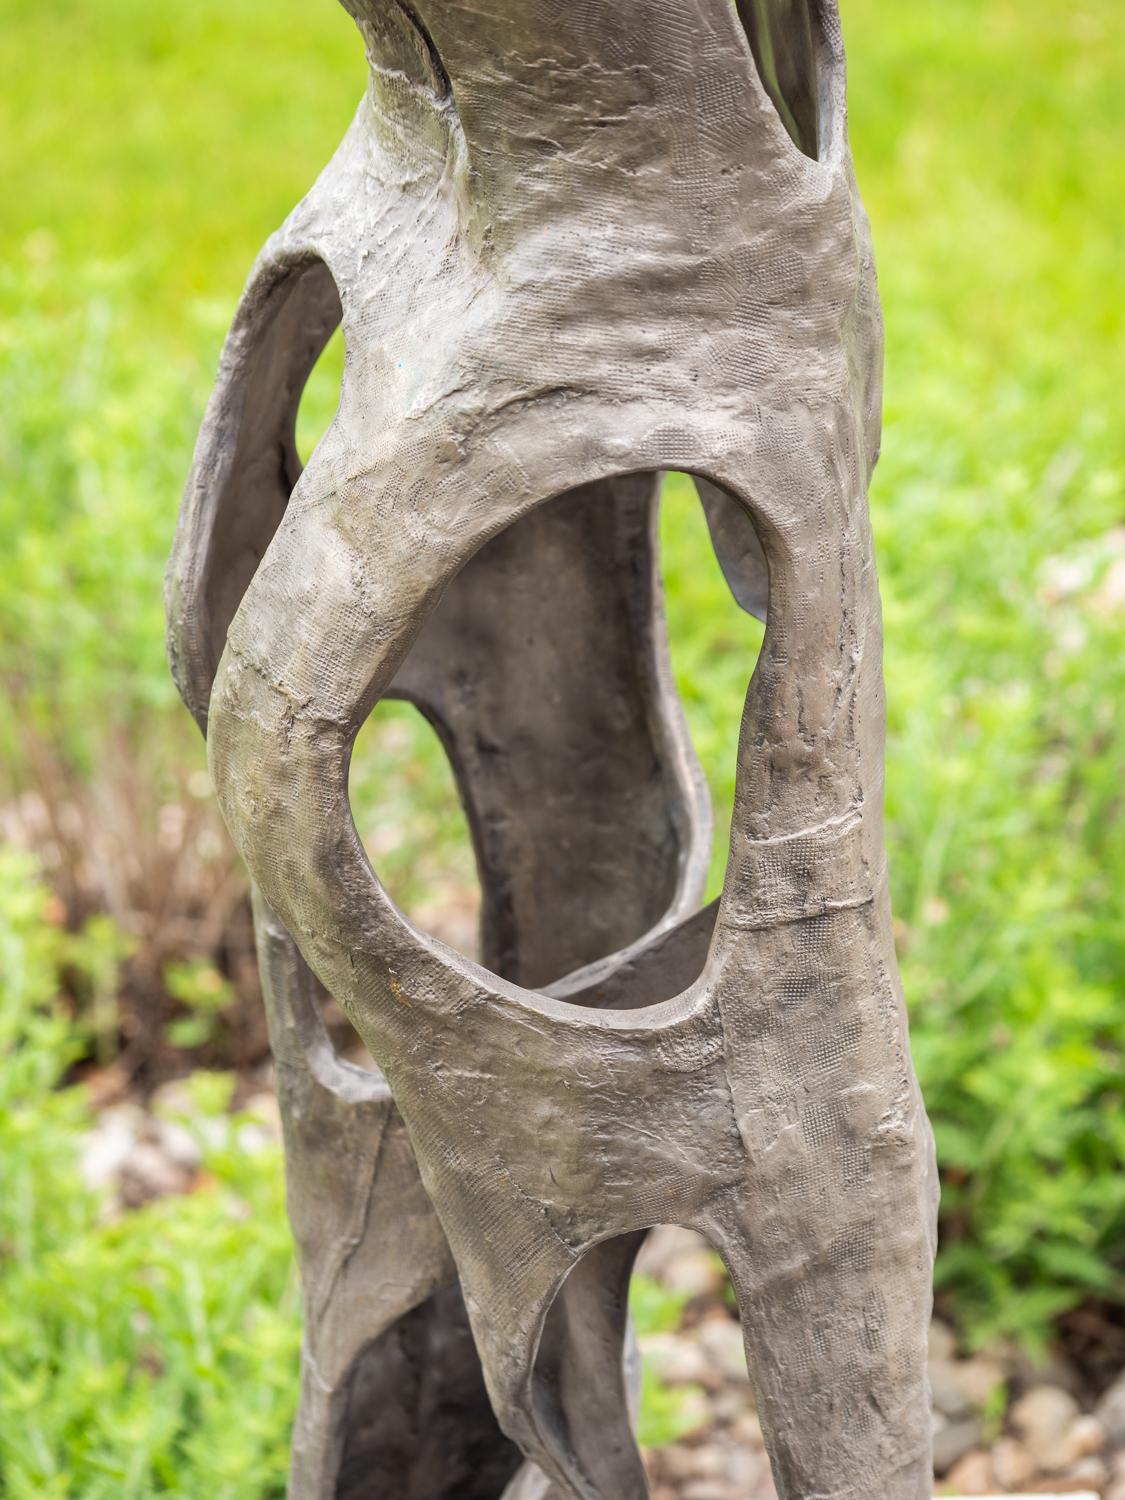 V_N_S Edition 4/9 - tall, abstracted, figurative female bronze outdoor sculpture - Gold Figurative Sculpture by David Fisher